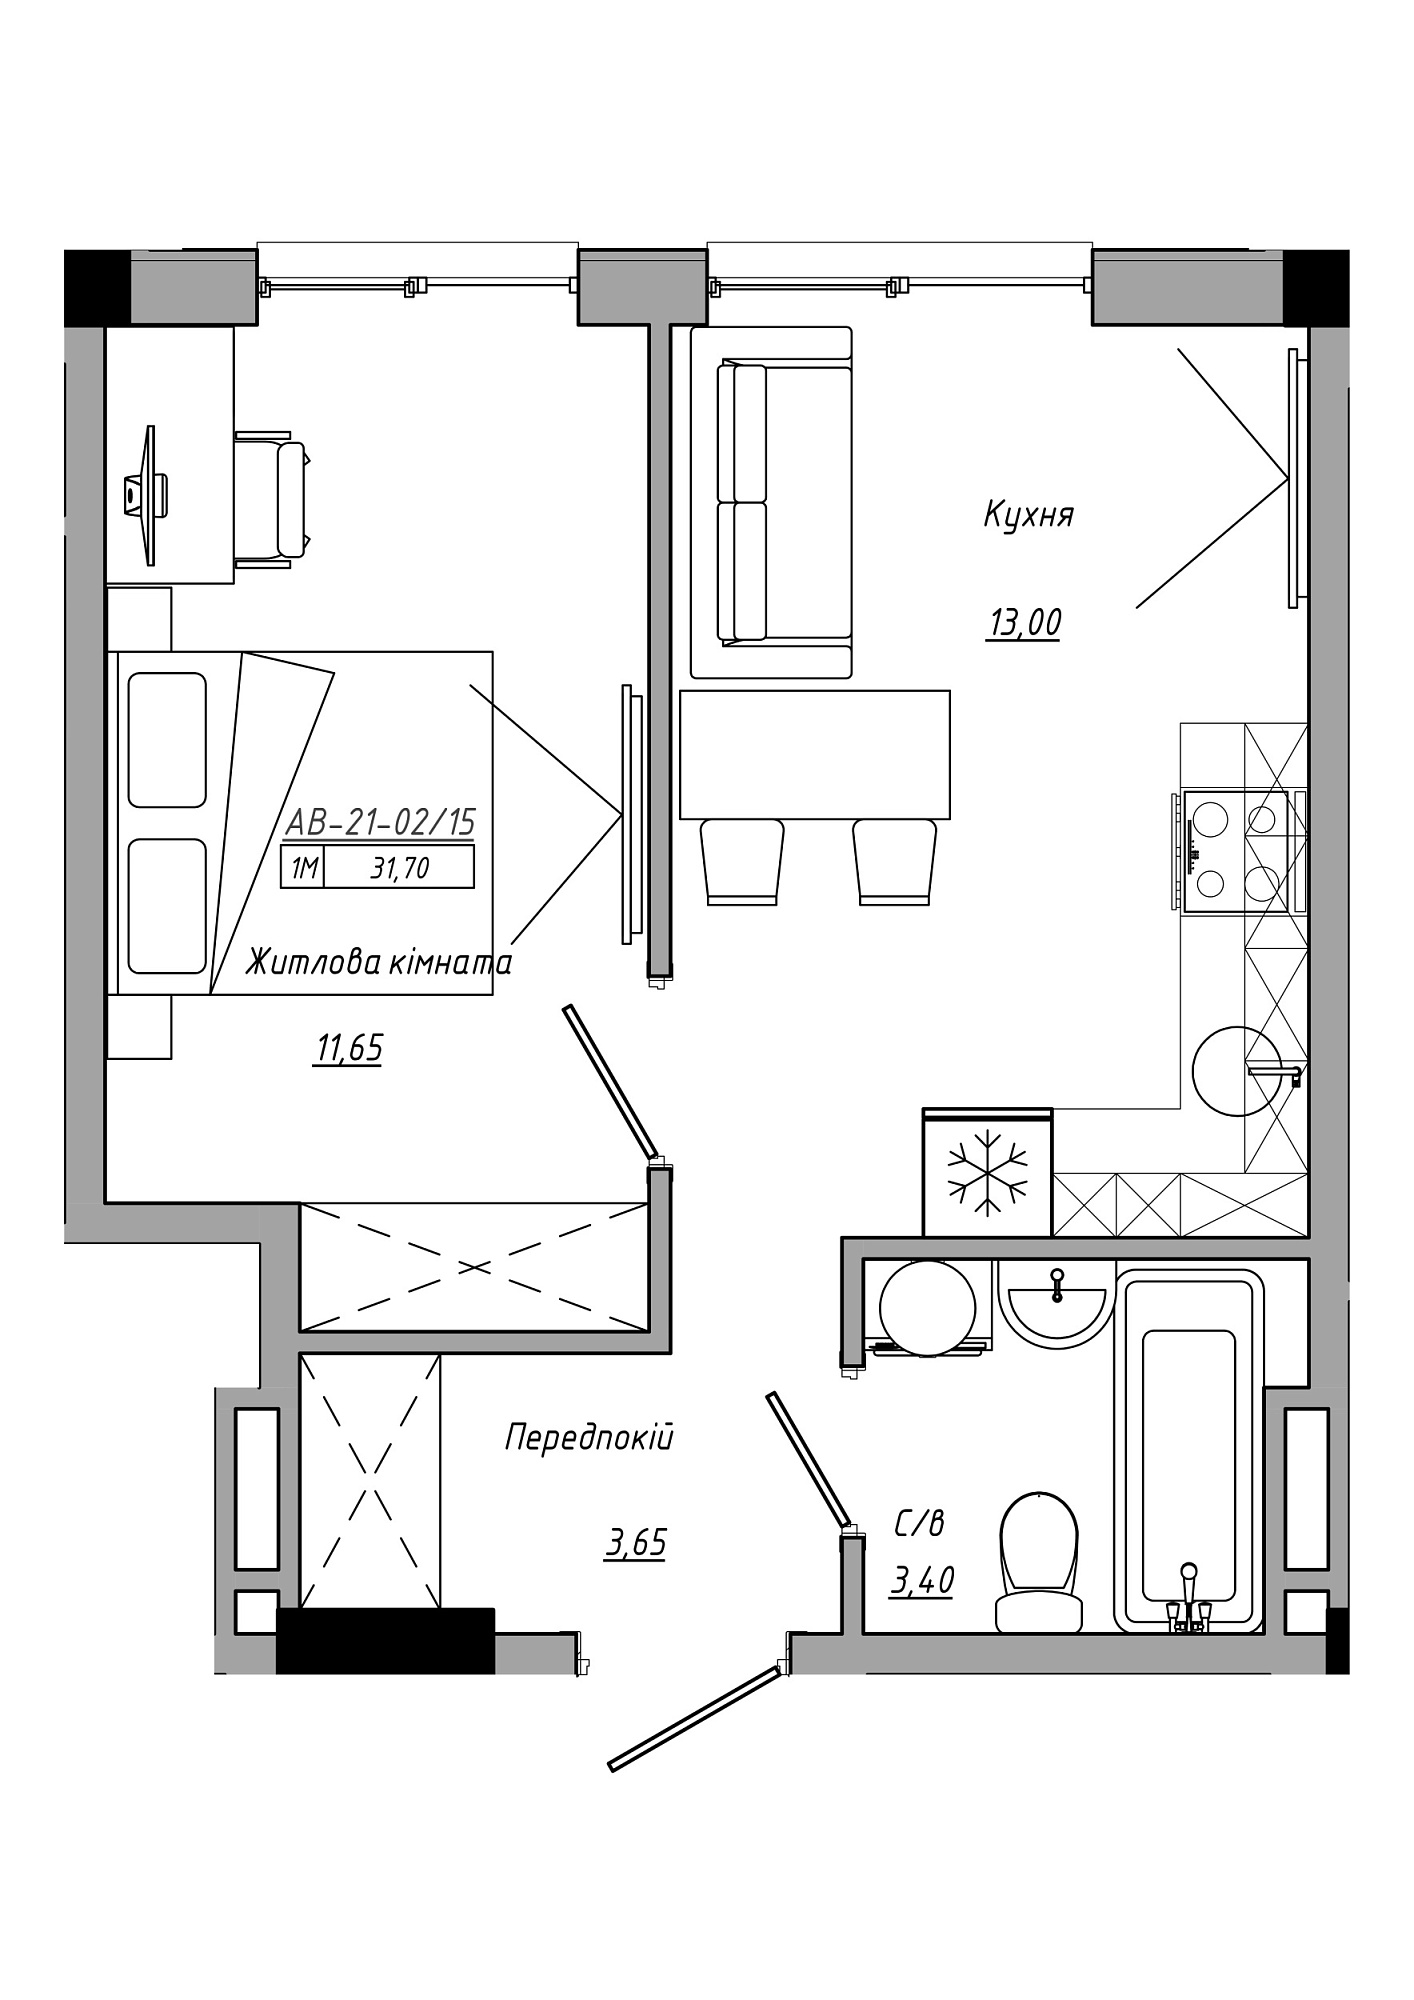 Planning 1-rm flats area 31.7m2, AB-21-02/00015.